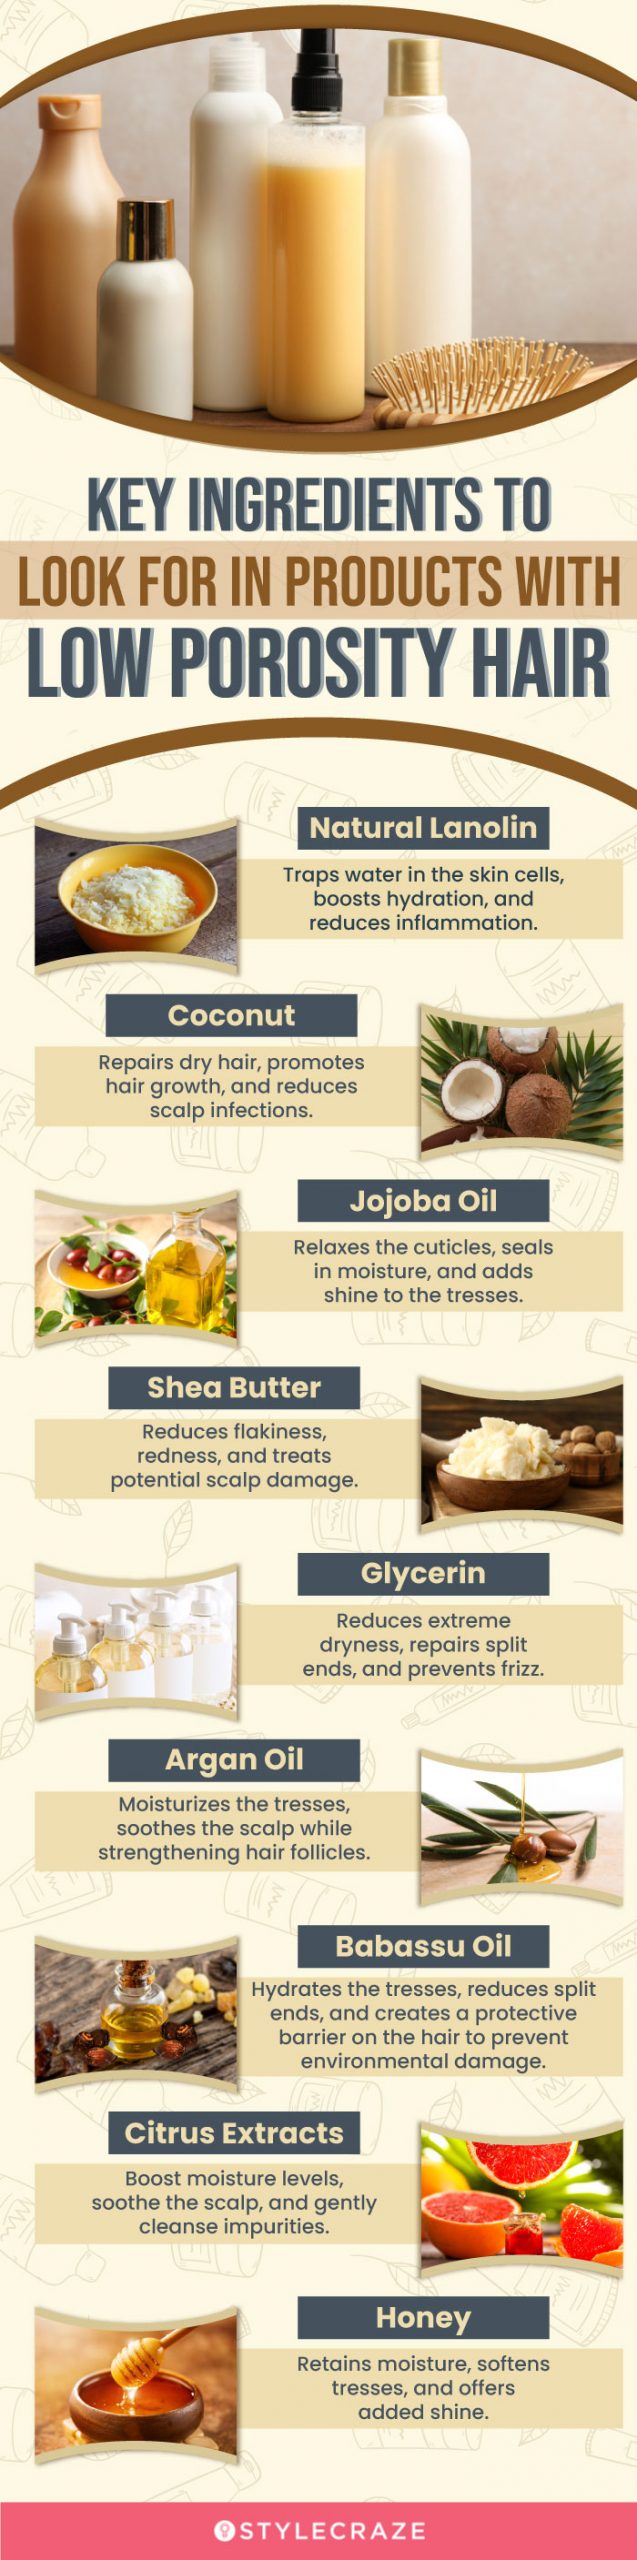 Key Ingredients To Look For In Products With Low Porosity Hair [infographic]